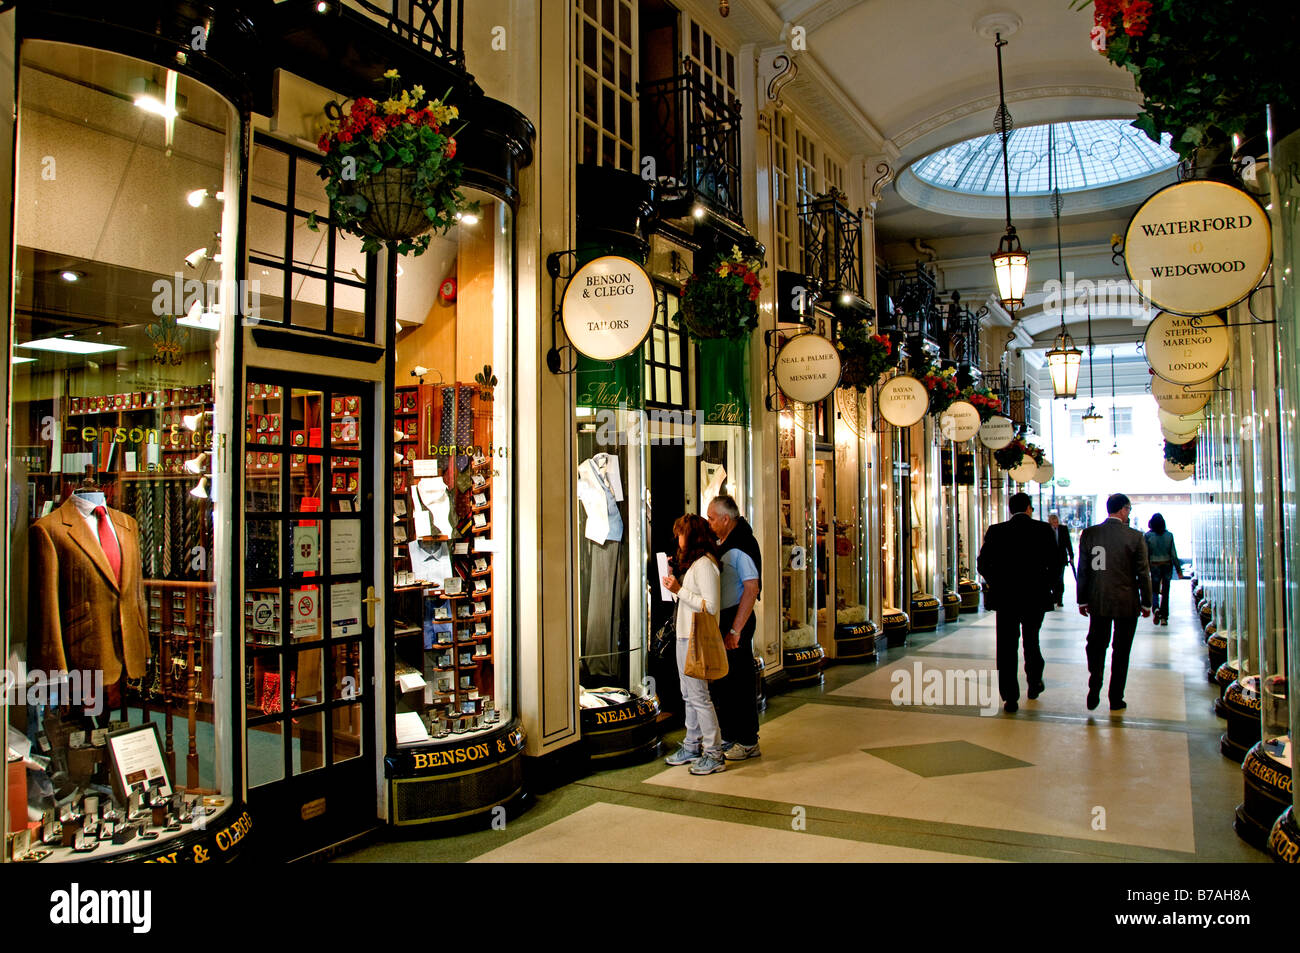 The Piccadilly Arcade runs between Piccadilly and Jermyn Street in central London. Stock Photo